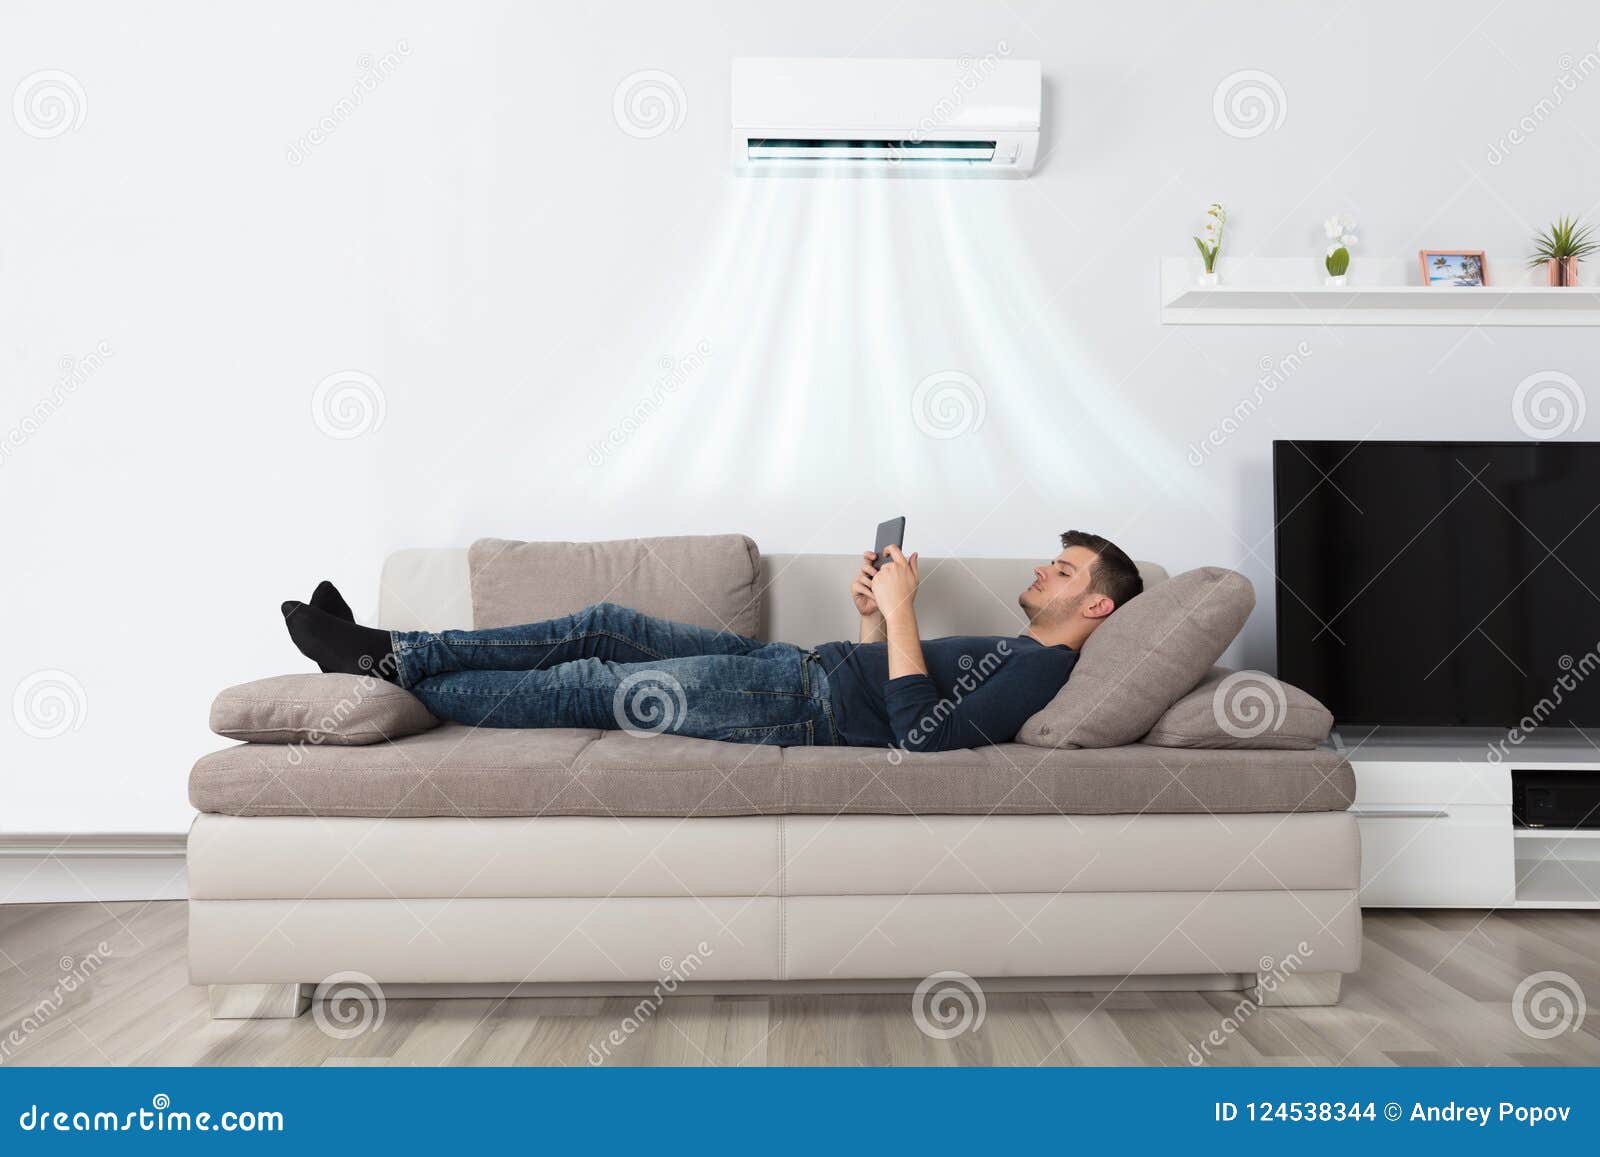 man lying on couch under air conditioner using tablet